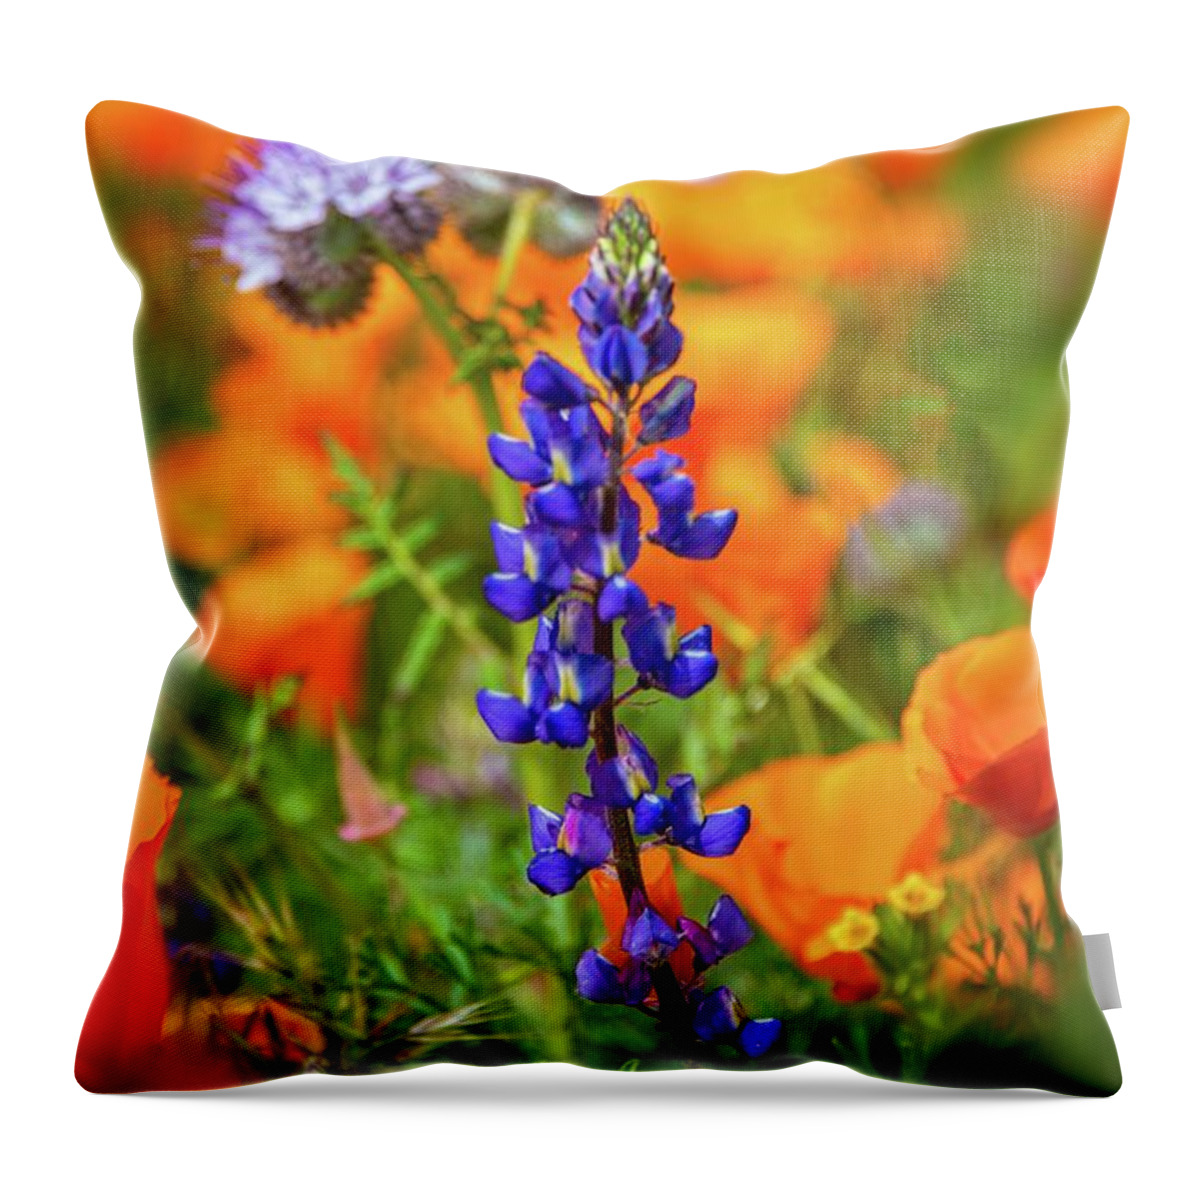 Superbloom Throw Pillow featuring the photograph Spring Delight - Superbloom 2019 by Lynn Bauer